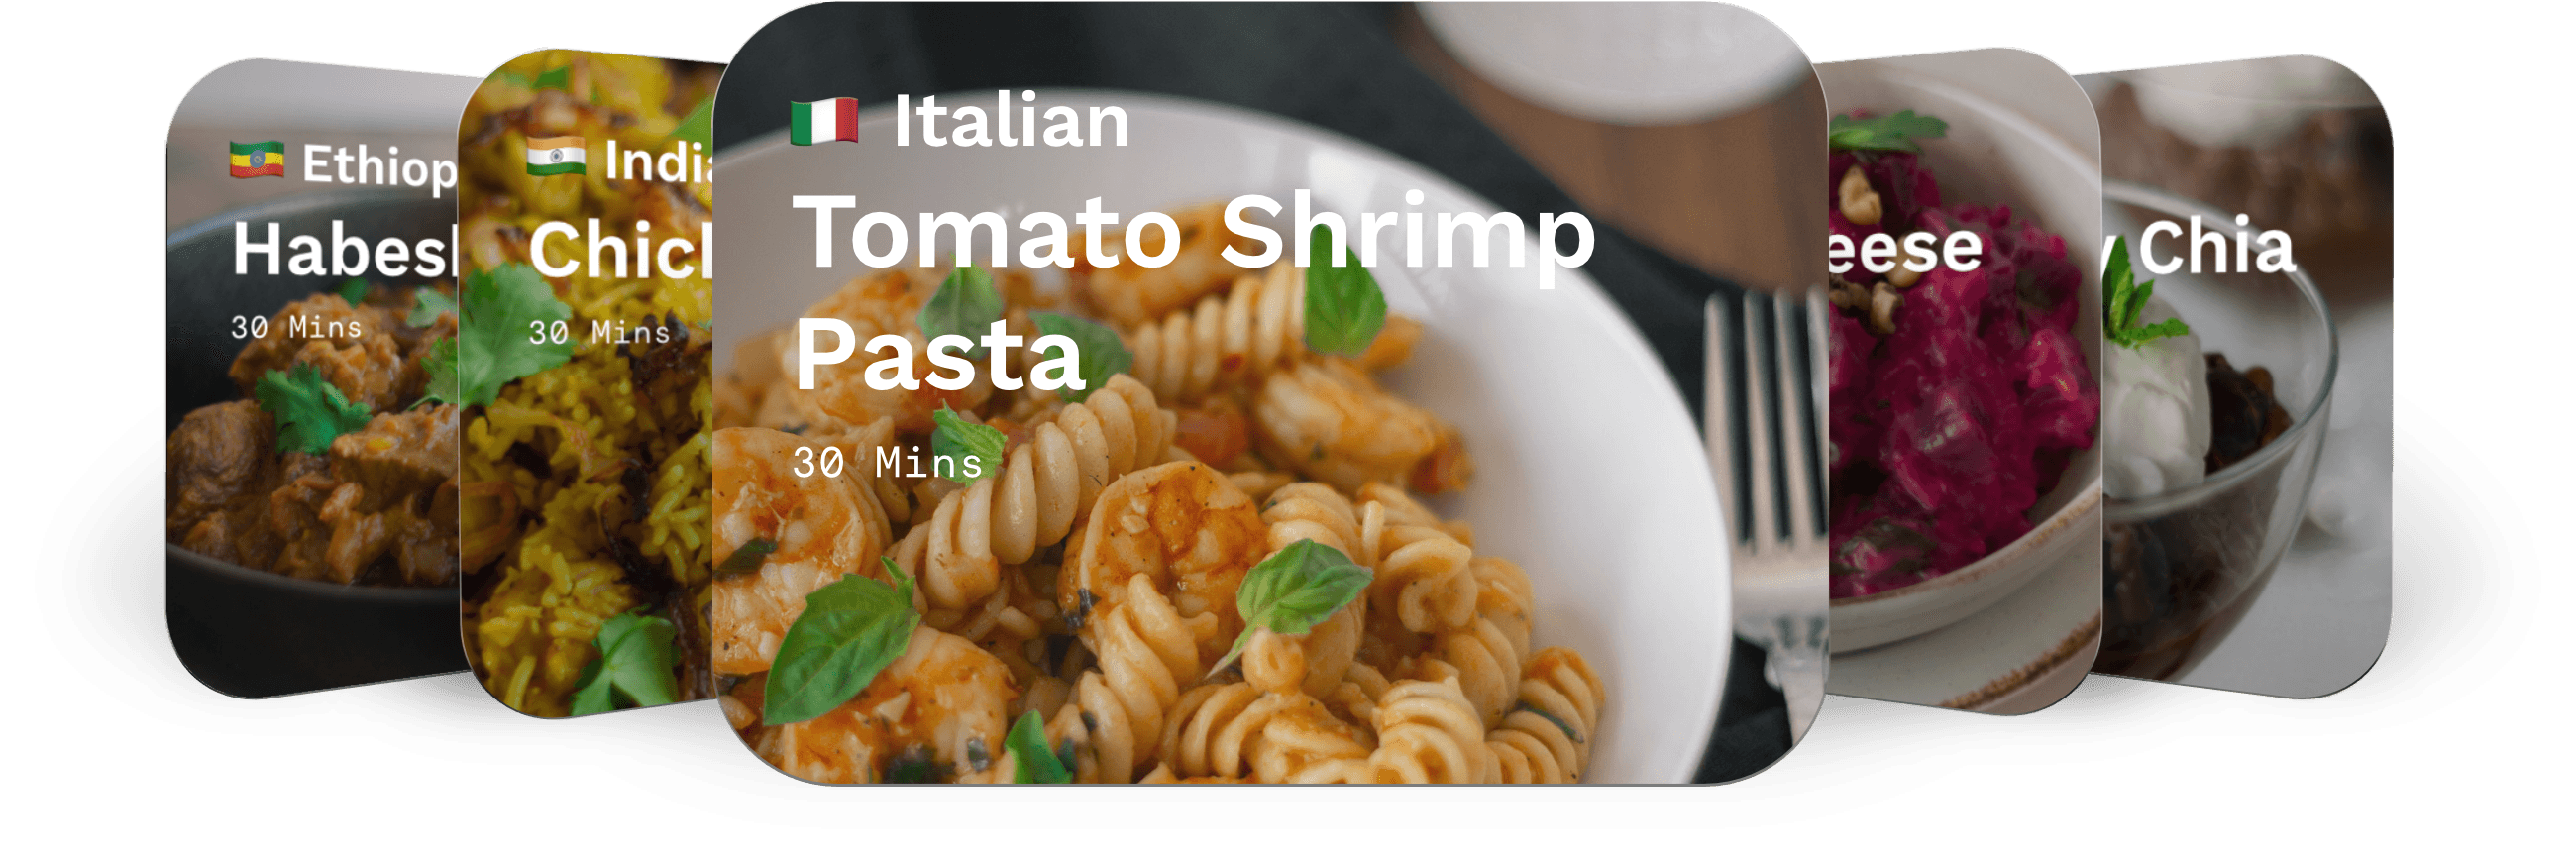 snapshot of recipe image cards. The cards share the recipe title country of origin and the time it takes Oliver to cook them. Front and center is the Italian dish, Tomato shrimp pasta, which takes Oliver 30min to cook...handsfree.